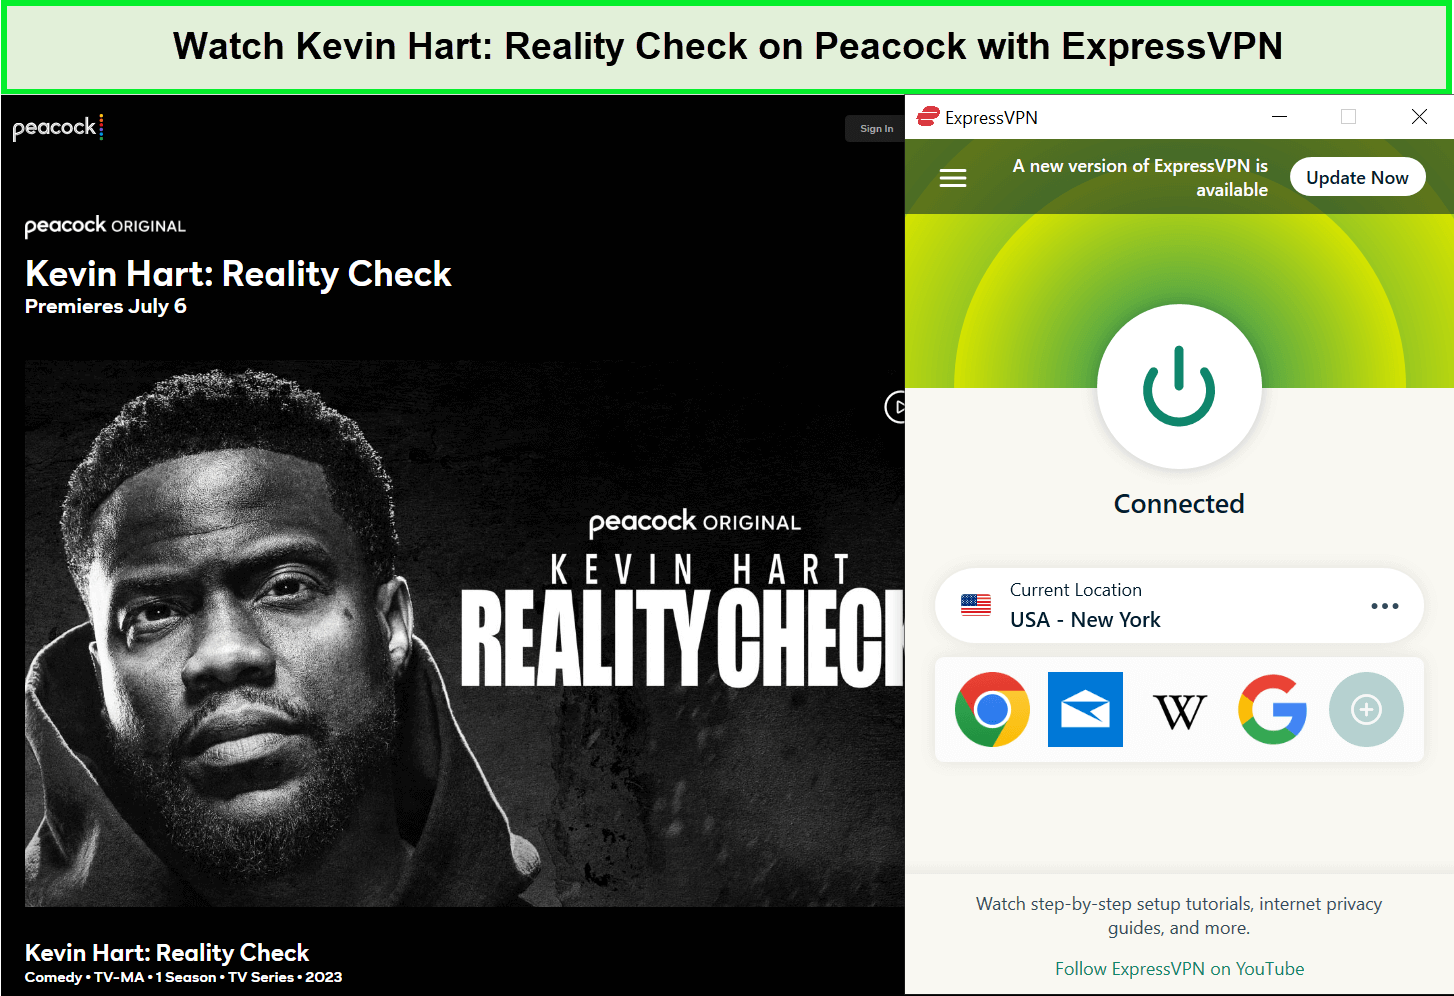 Watch-Kevin-Hart-Reality-Check-in-UK-on-Peacock-with-ExpressVPN